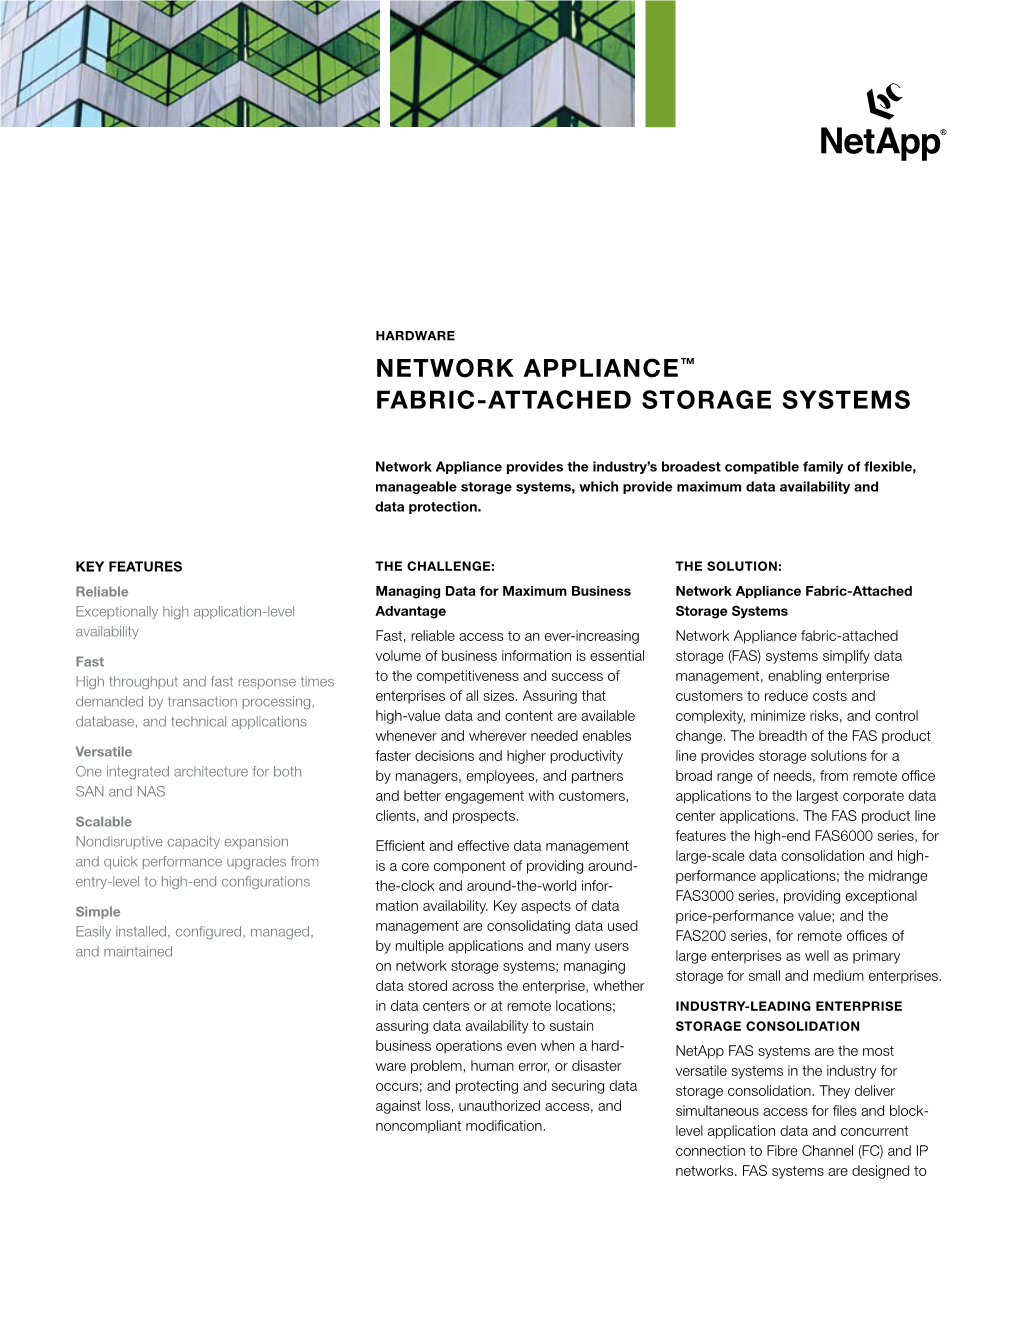 Network Appliance Fabric-Attached Storage Systems